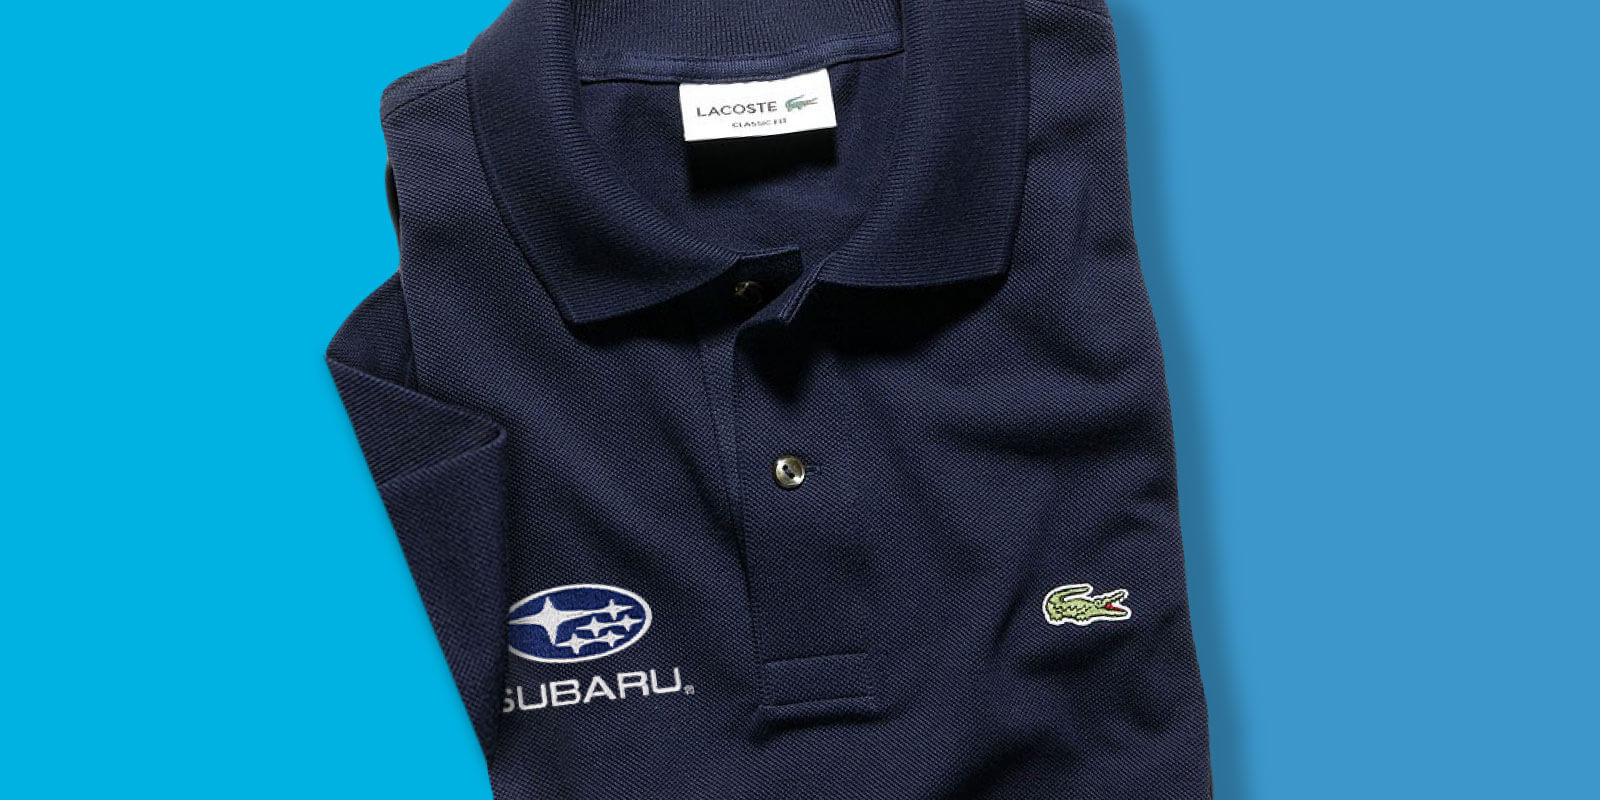 Lacoste Custom Branded Company Clothing – Corporate Gear